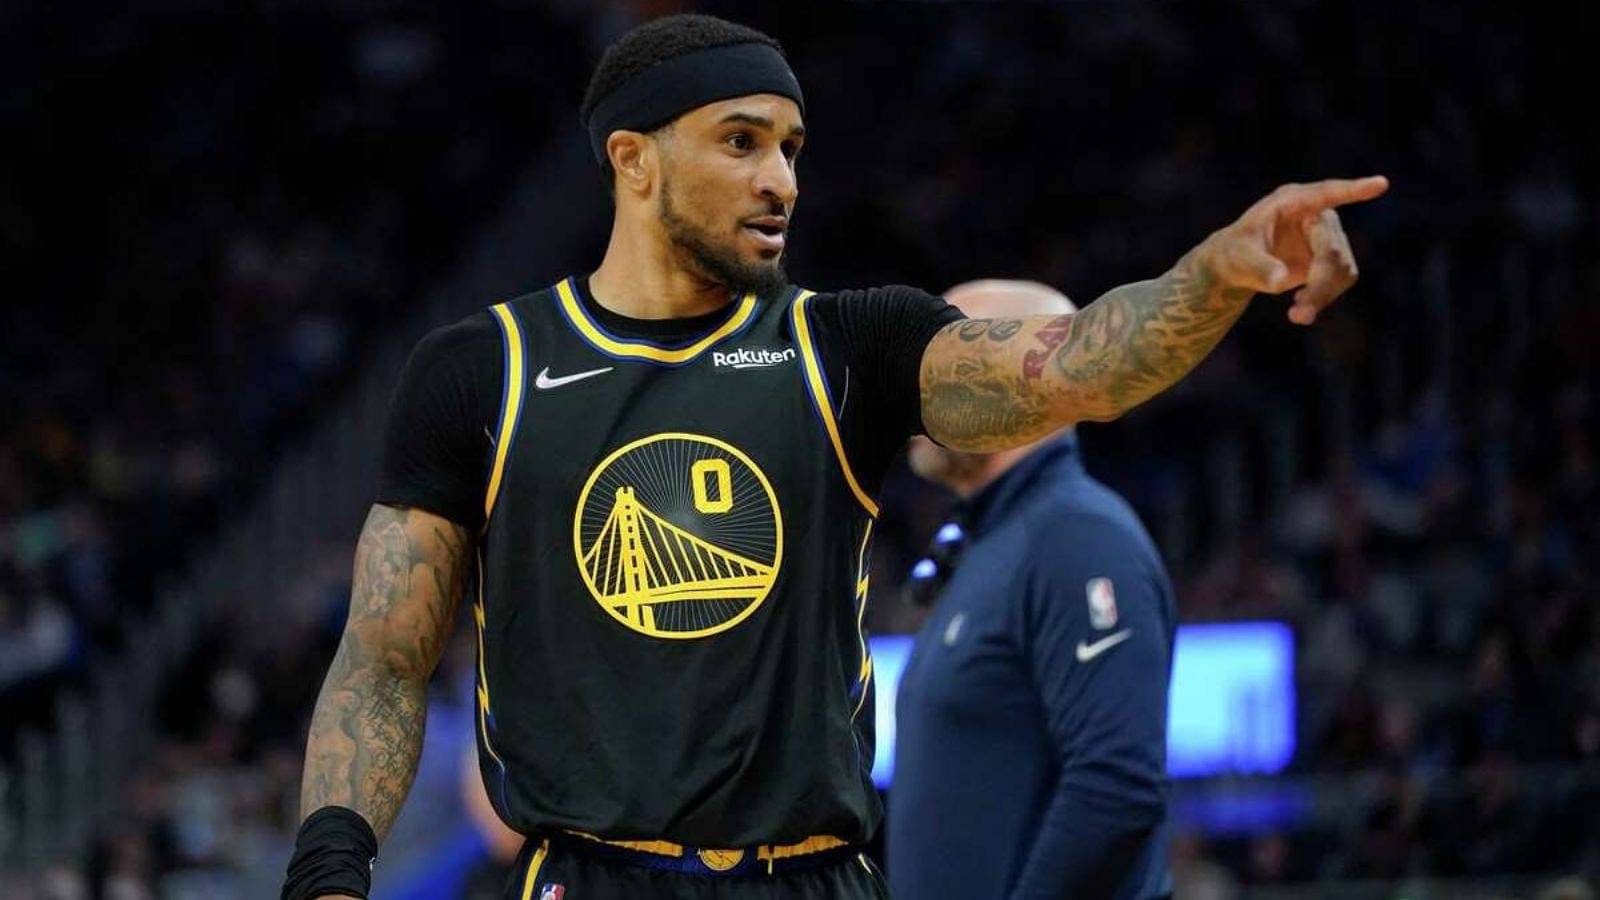 "Gary Payton II thought of becoming a video coordinator and now starts in NBA playoffs": How the Warriors point guard's career took off after playing in G-league for 5 years